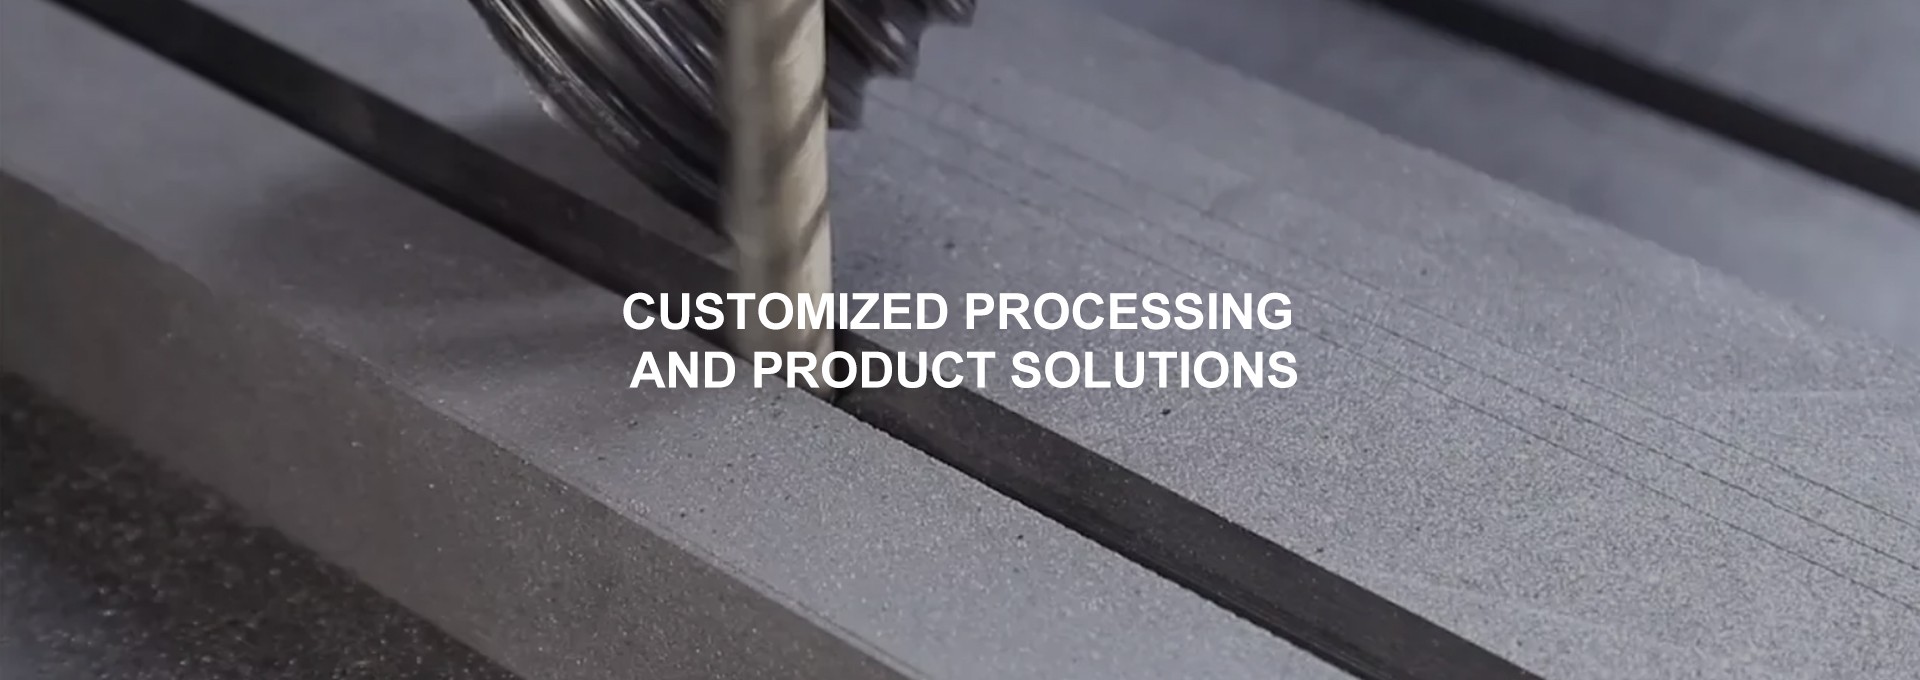 CUSTOMIZED PROCESSING AND PRODUCT SOLUTIONS